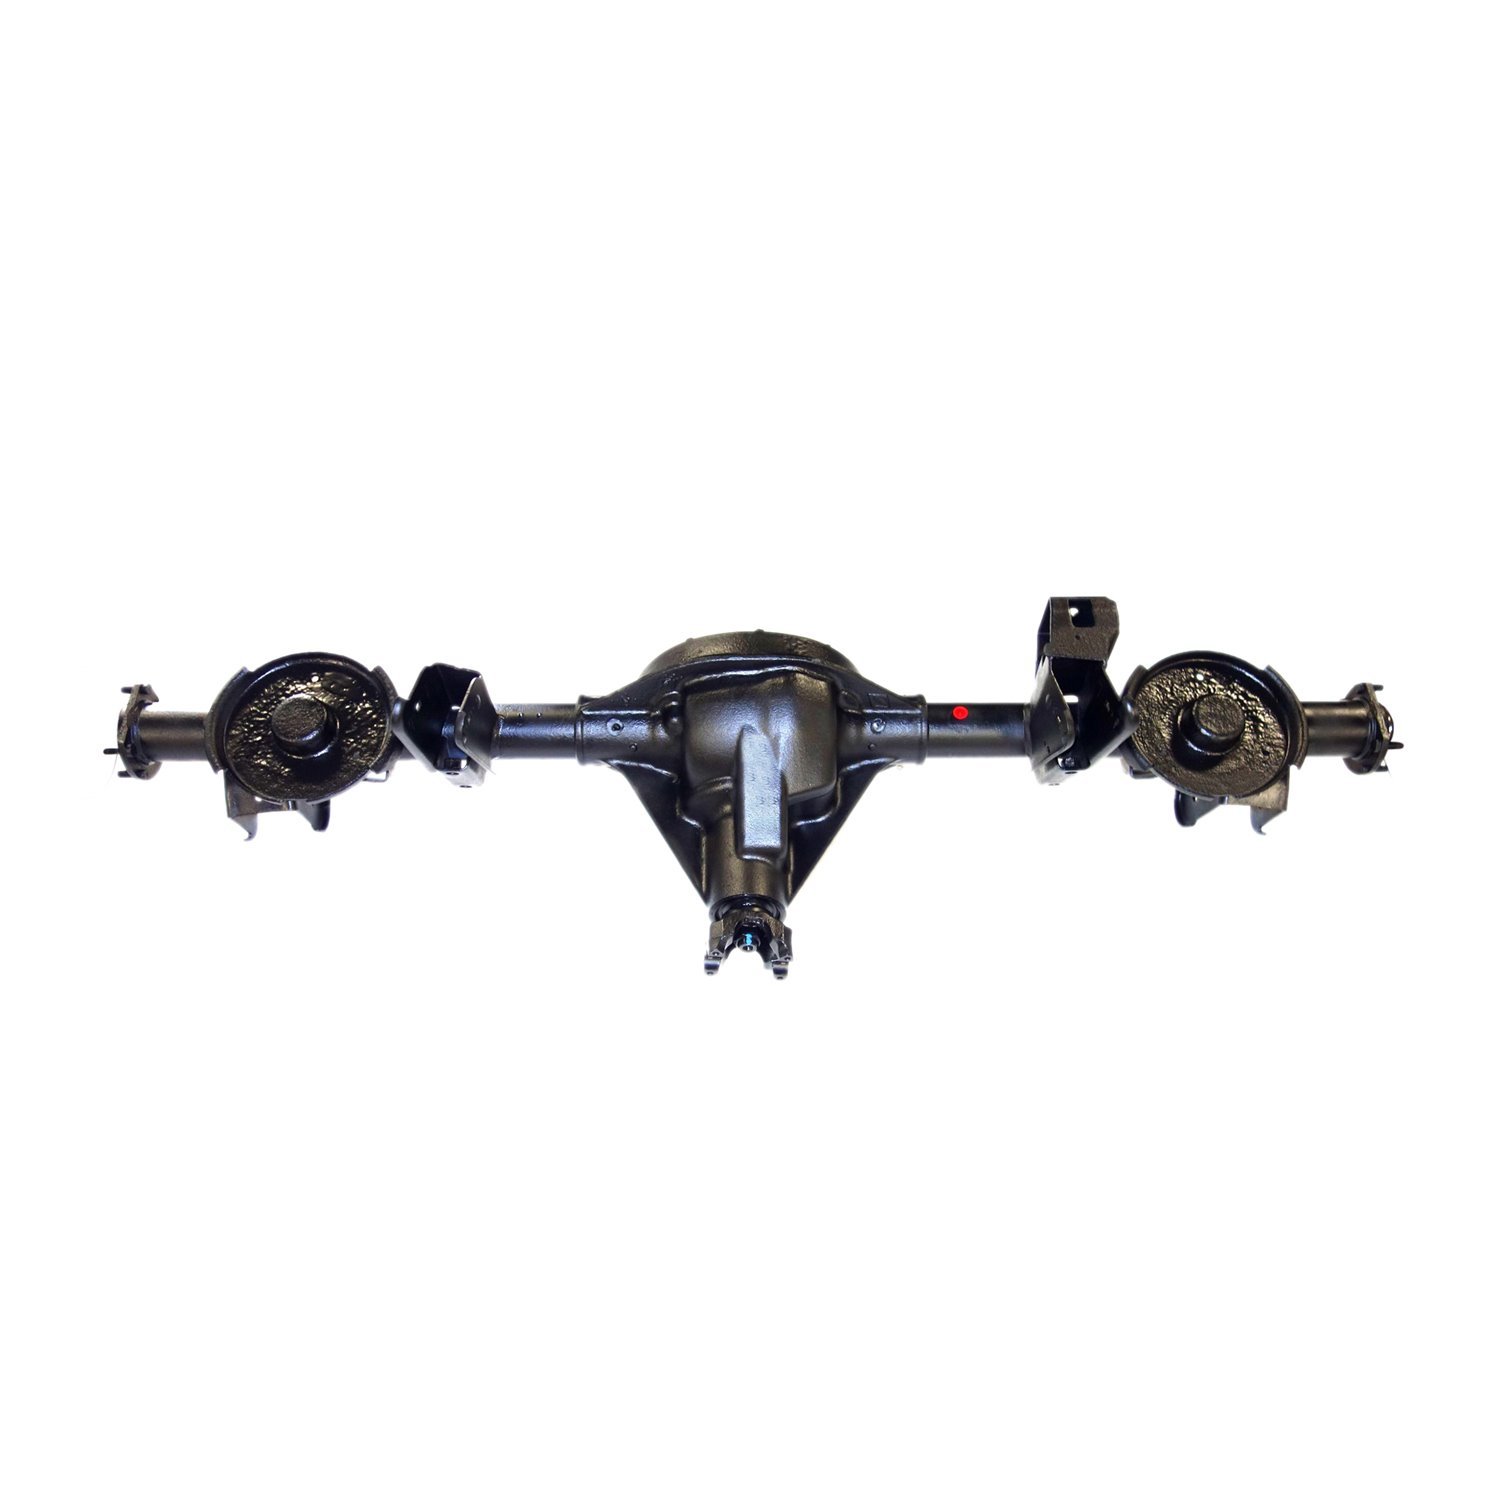 Remanufactured Complete Axle Assembly for Dana 35 90-95 Jeep Wrangler 3.73 Ratio w/o ABS